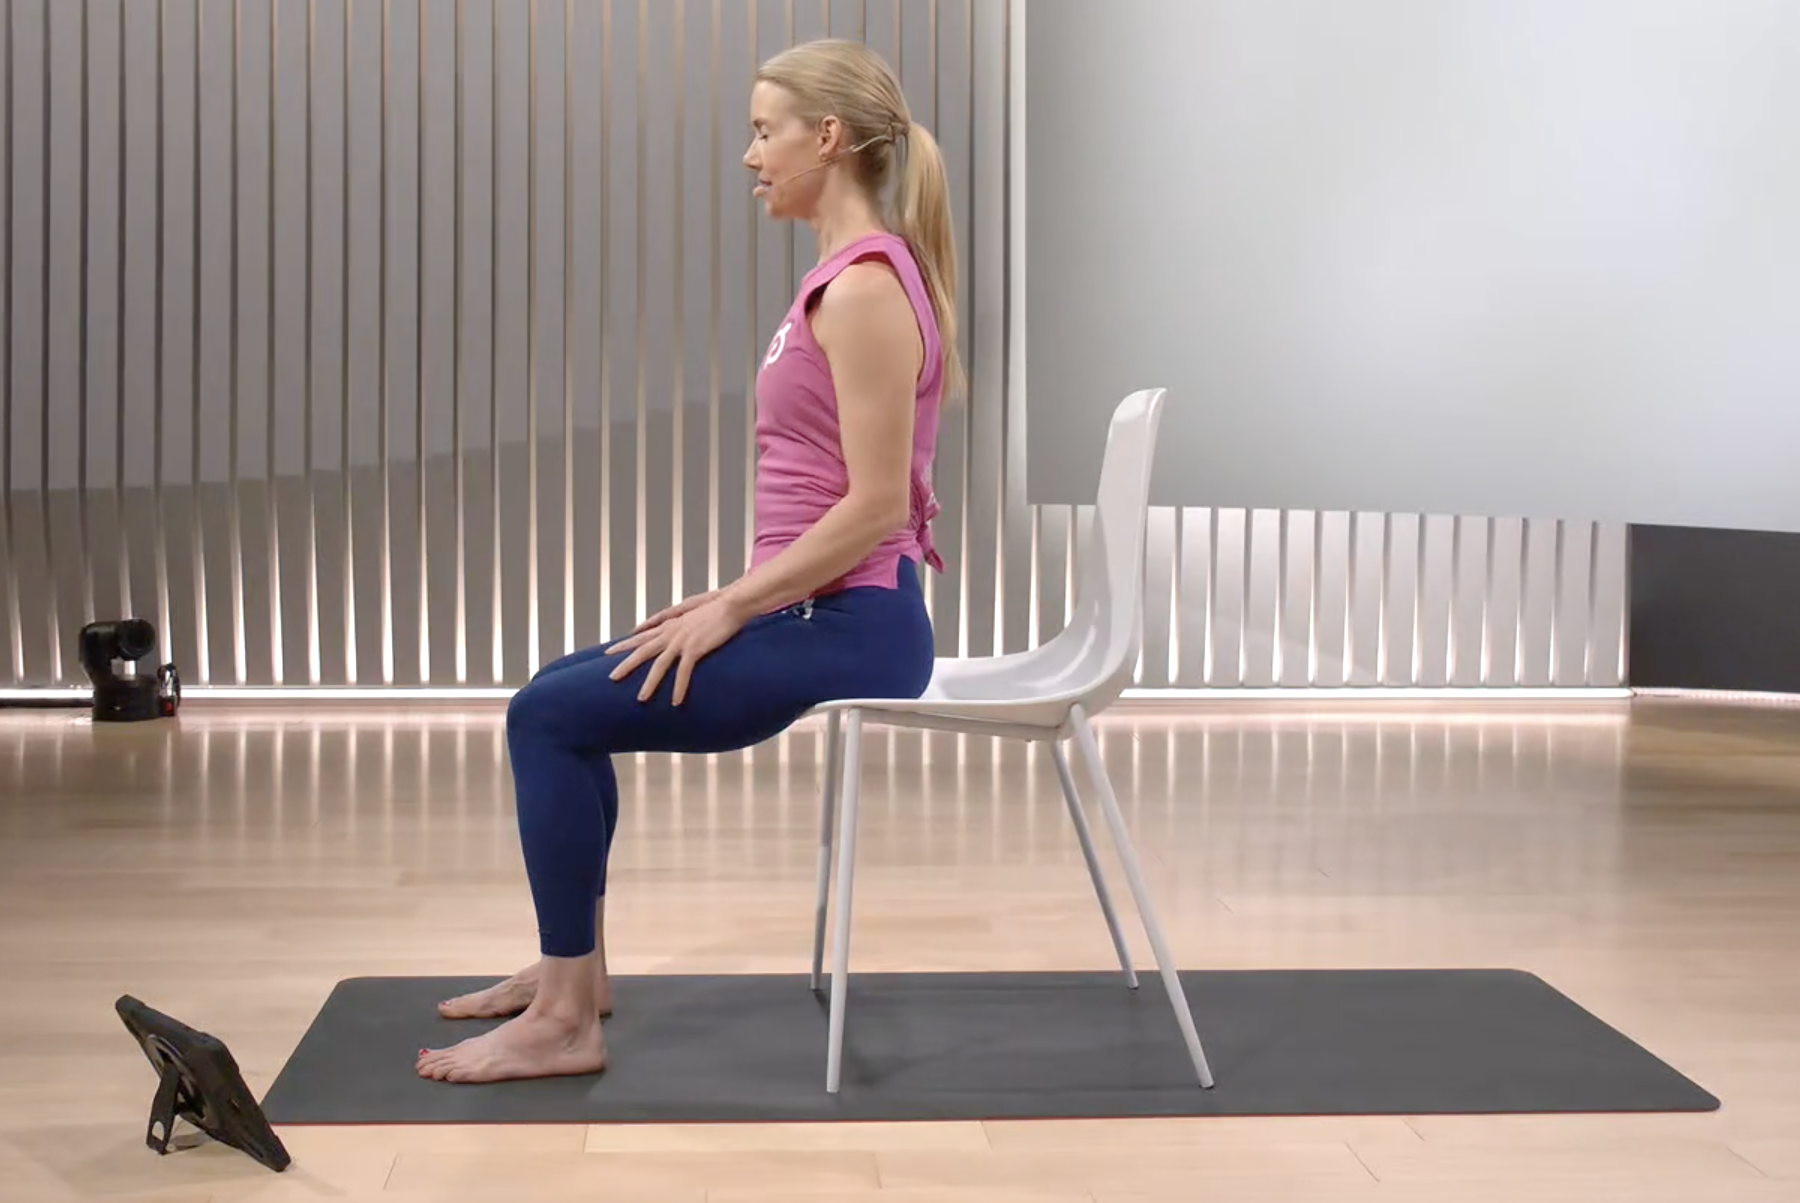 Chair Yoga Standing Exercises: More Ways to Do Yoga With Your Chair